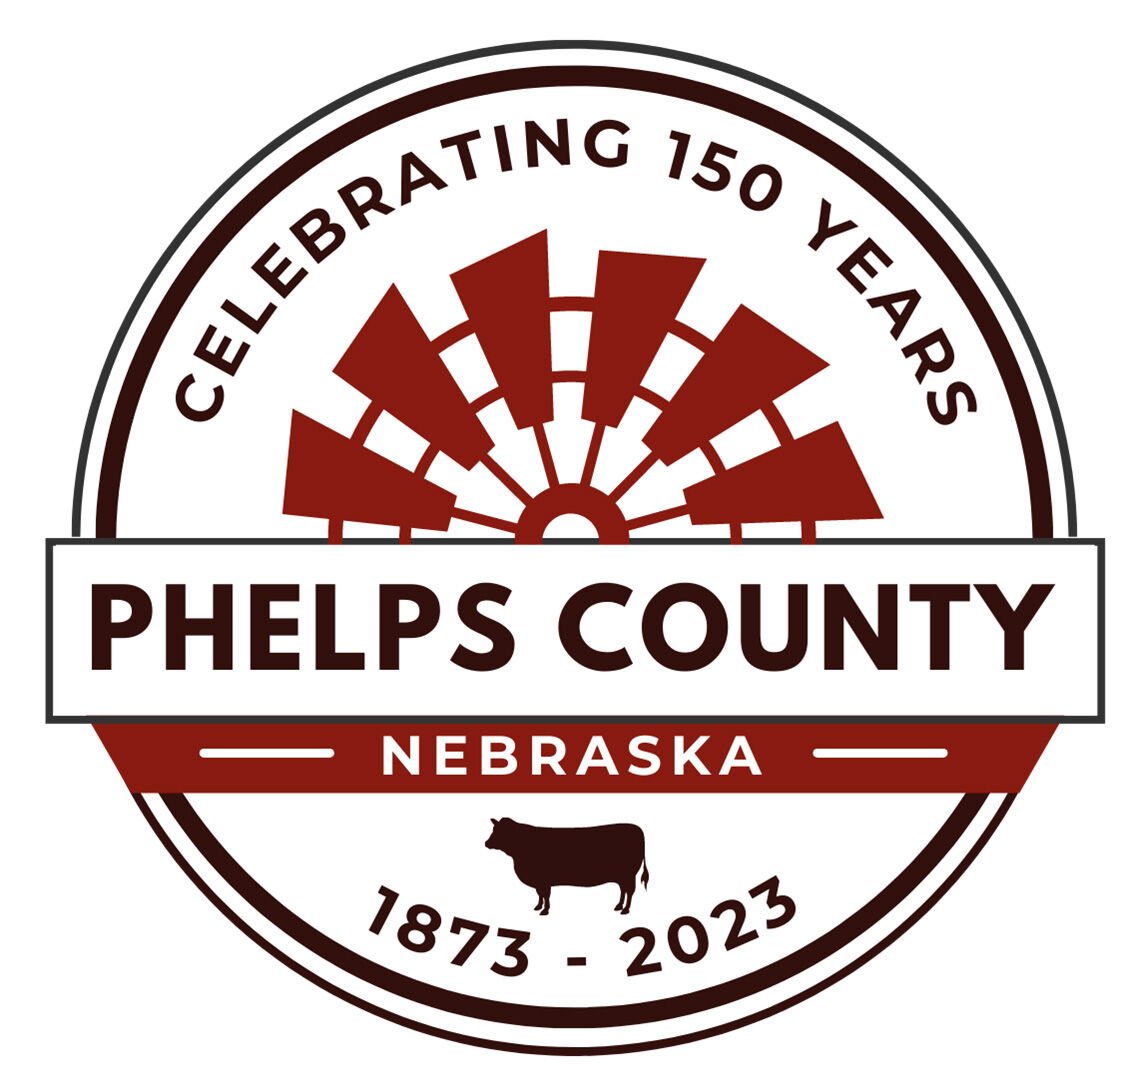 Phelps County to celebrate 150 years